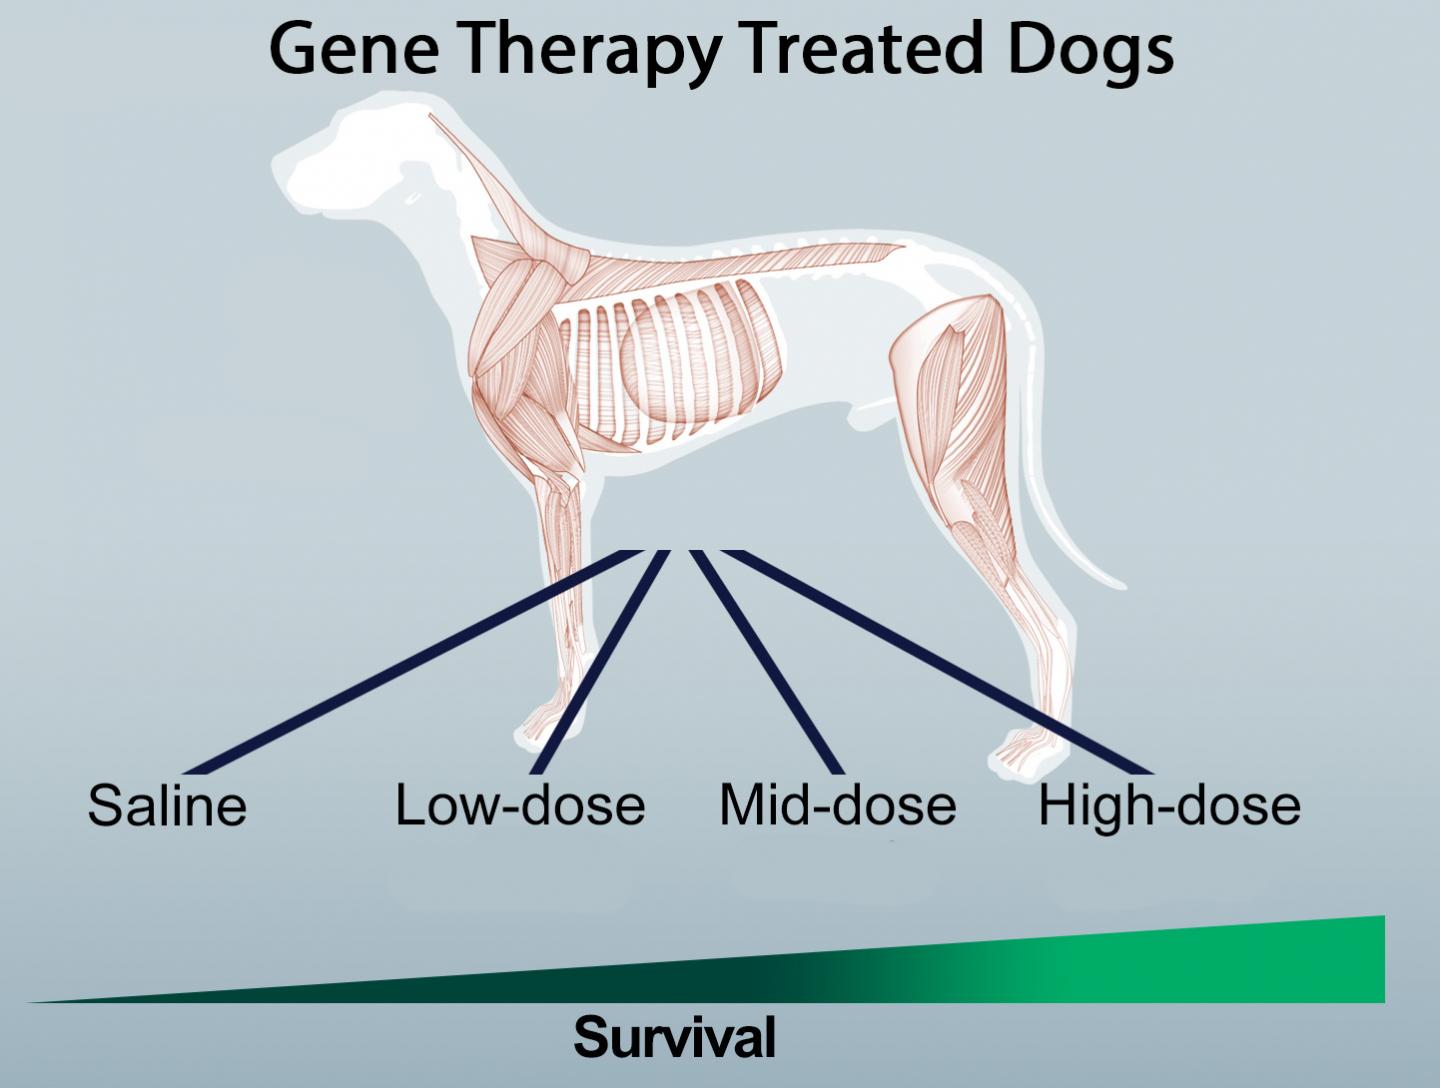 Dose-Related Survival Effects of Gene Therapy on Canine Muscle Disorder